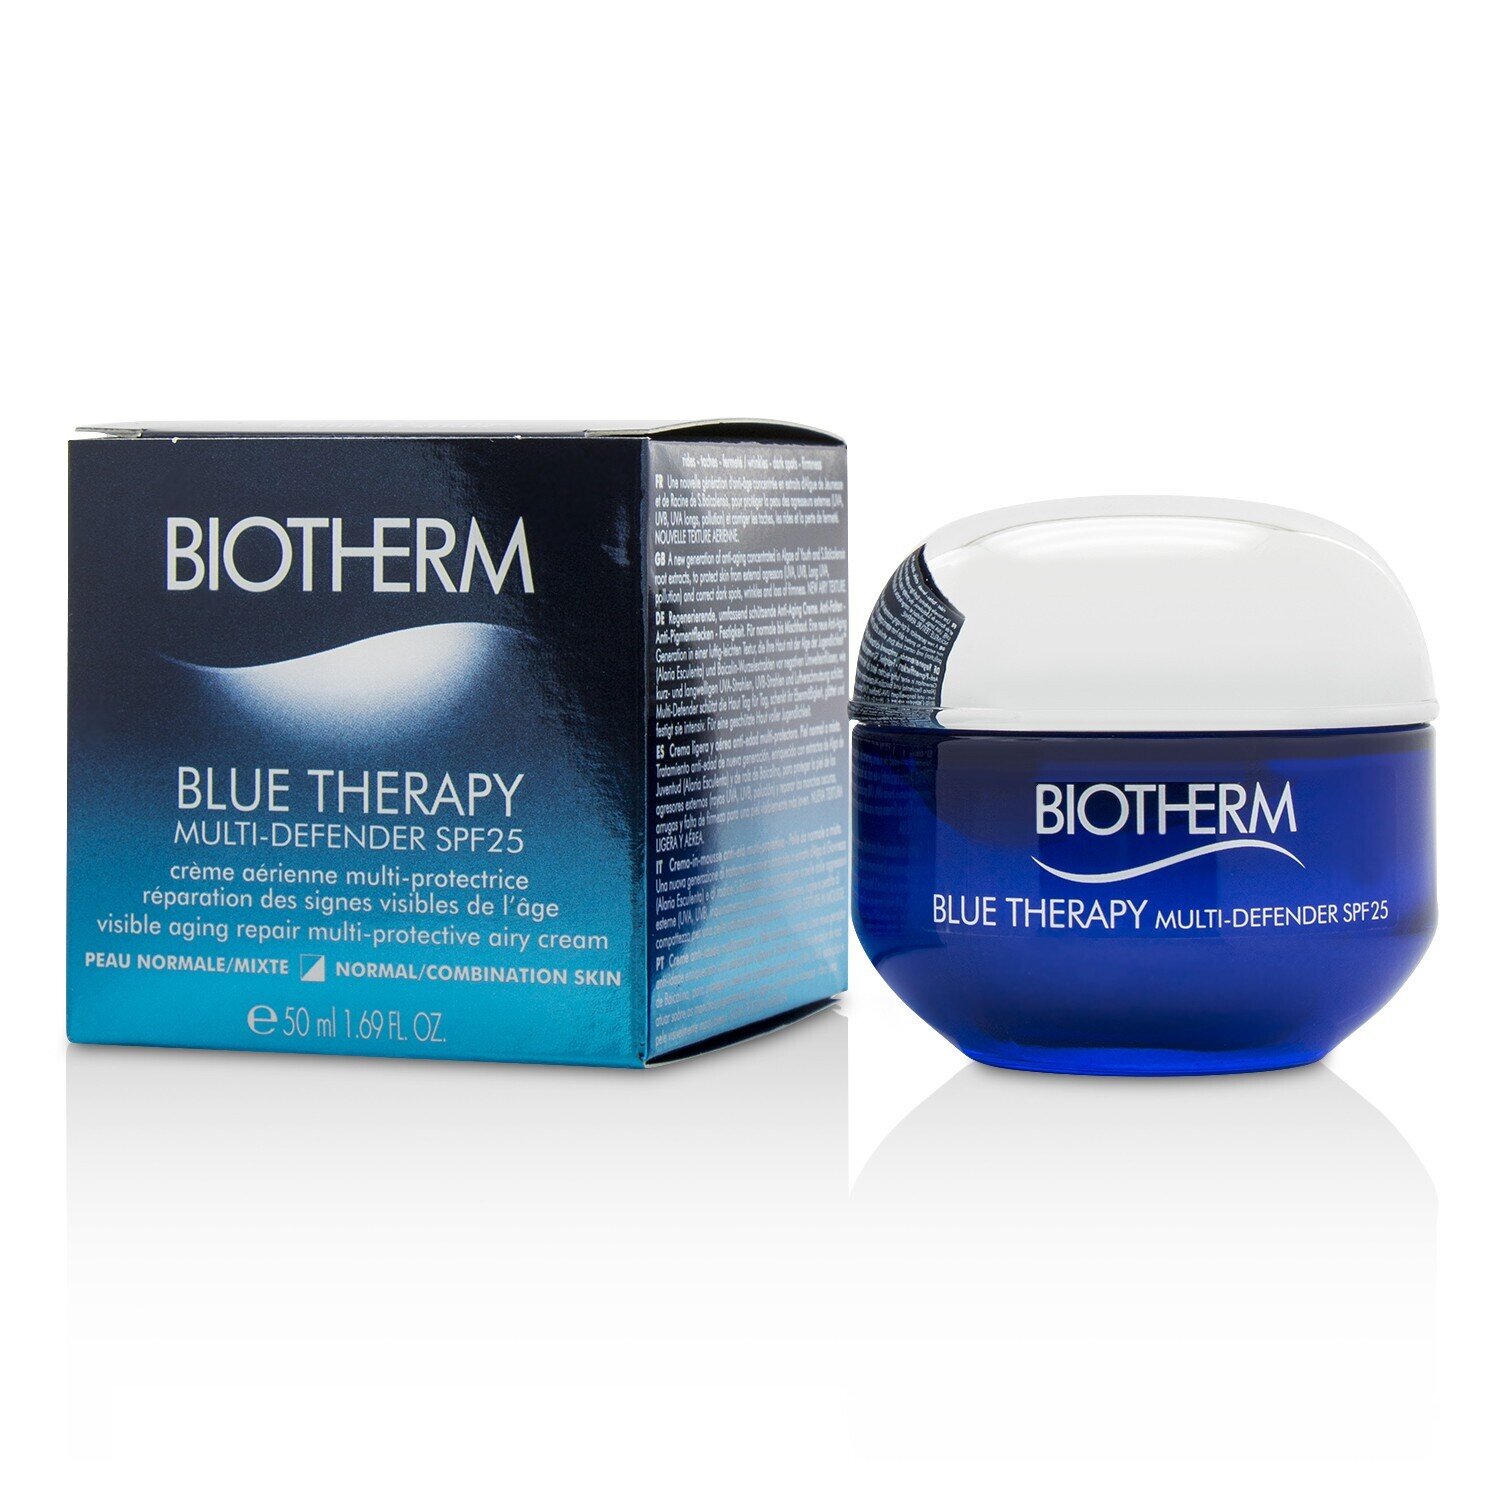 Biotherm Blue Therapy Multi-Defender SPF 25 - Normal/Combination